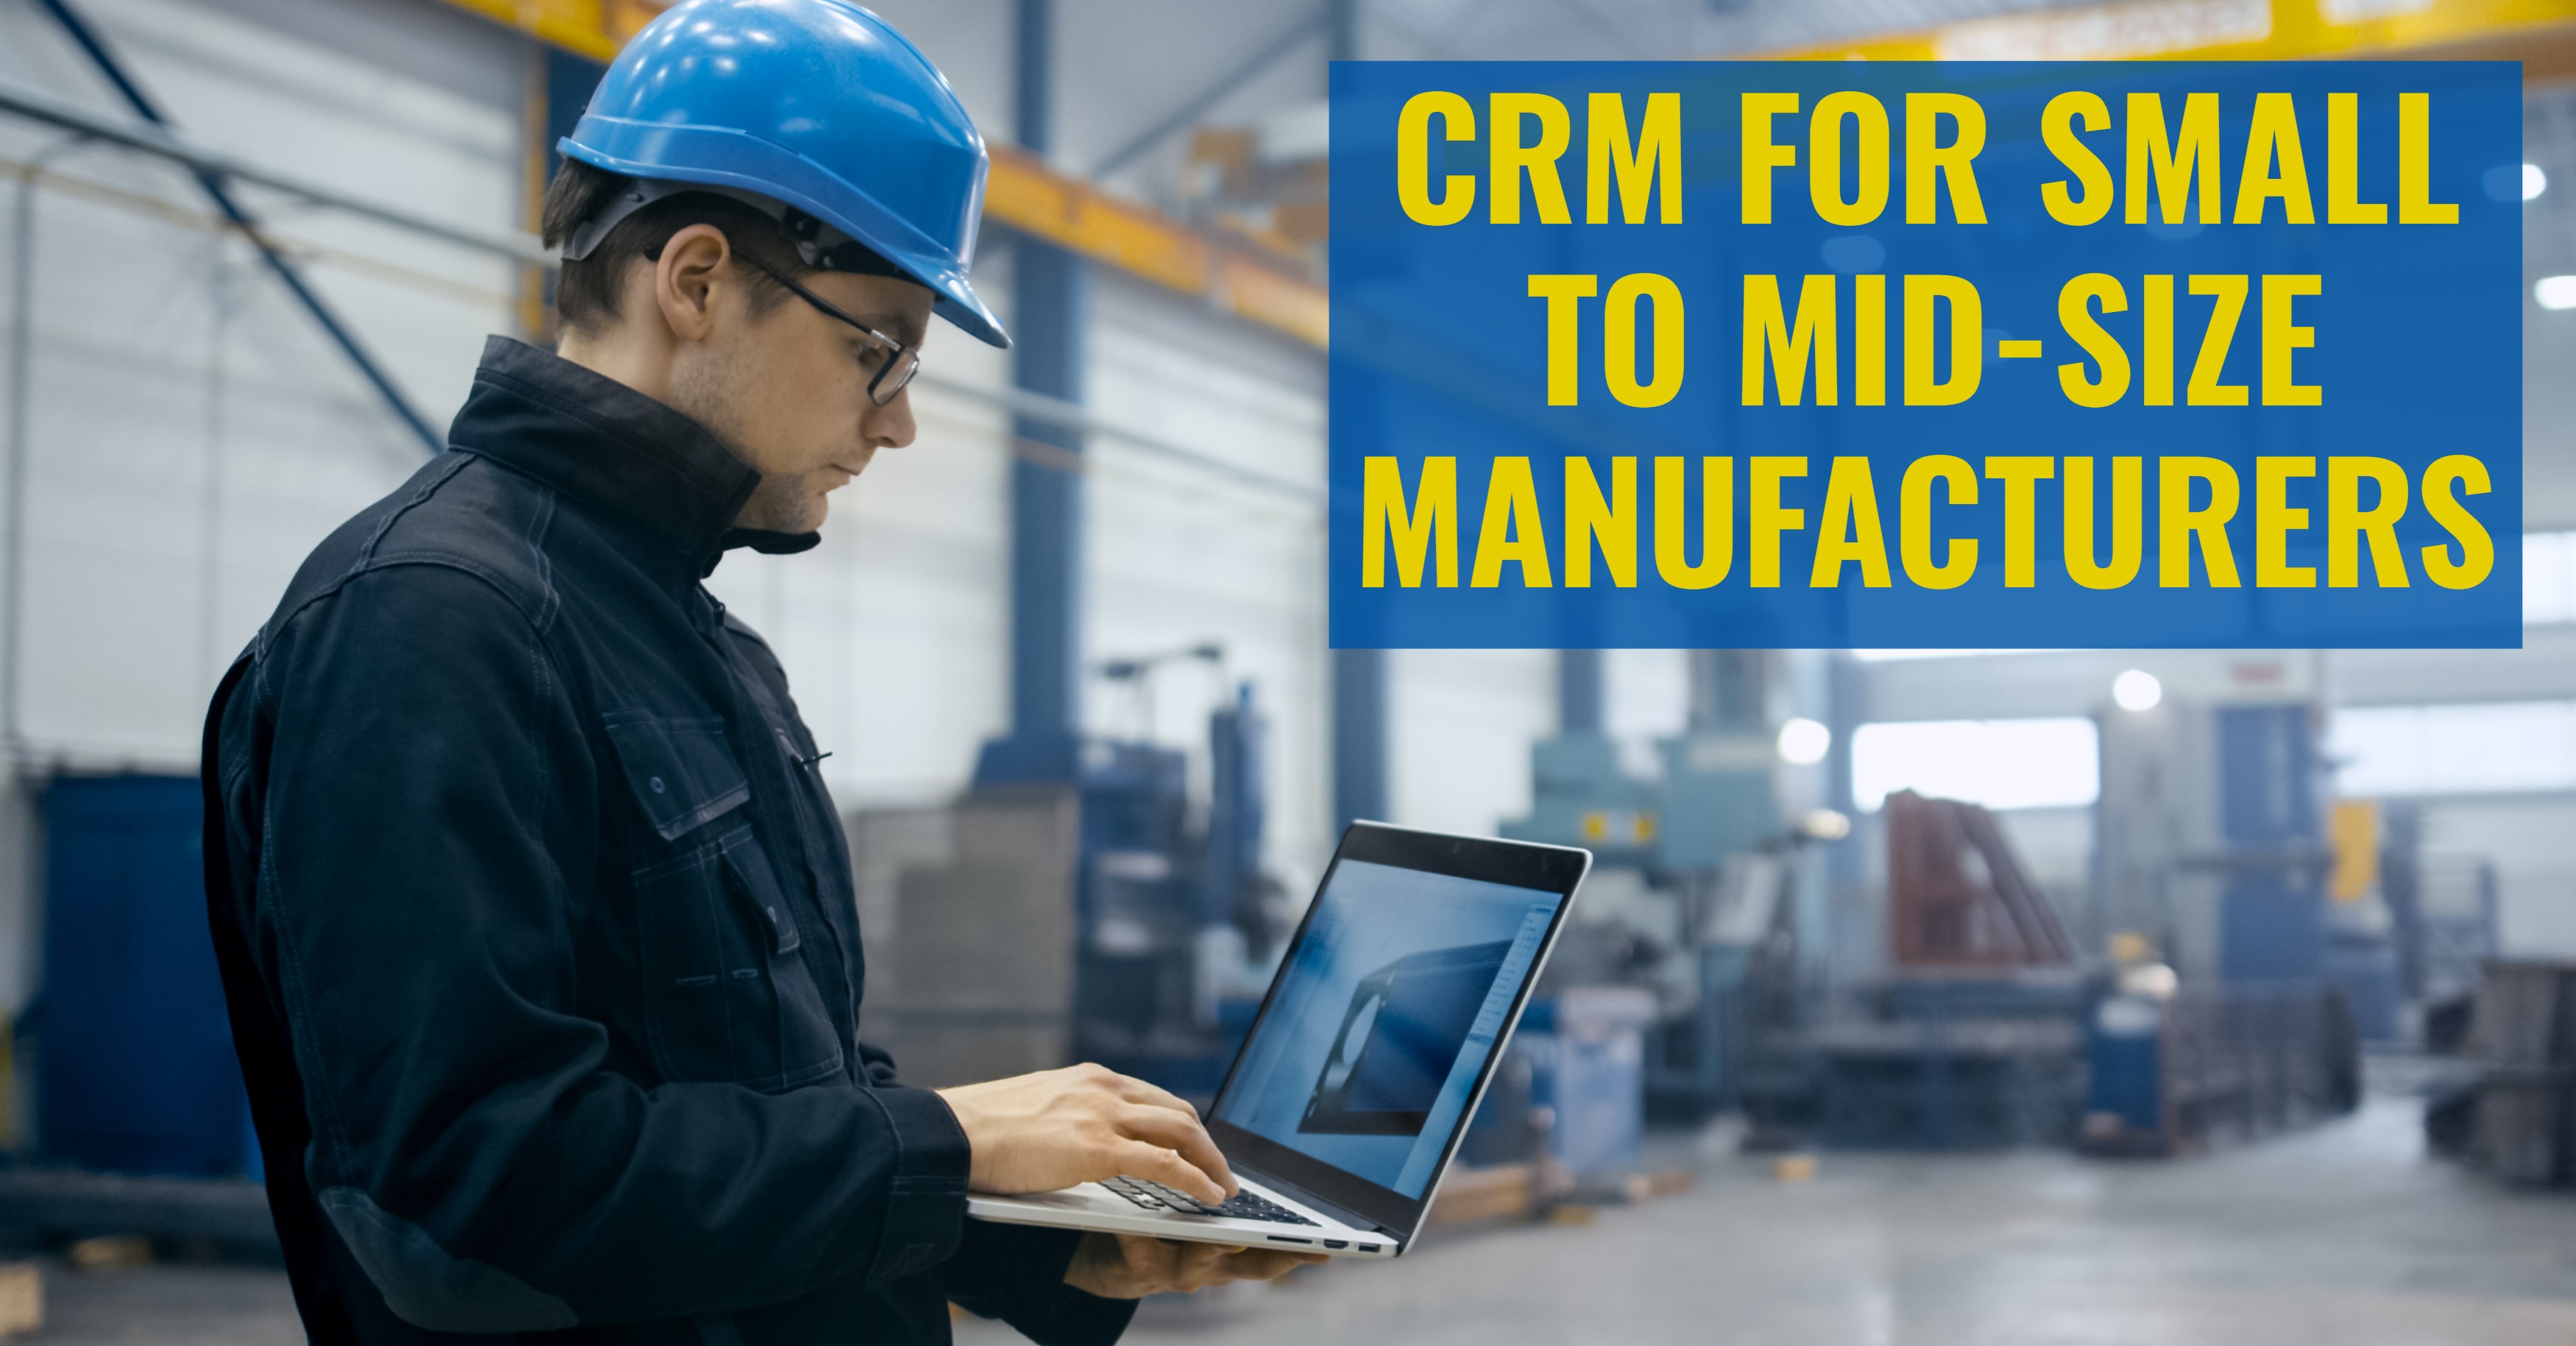 crm-small-manufacturing-min